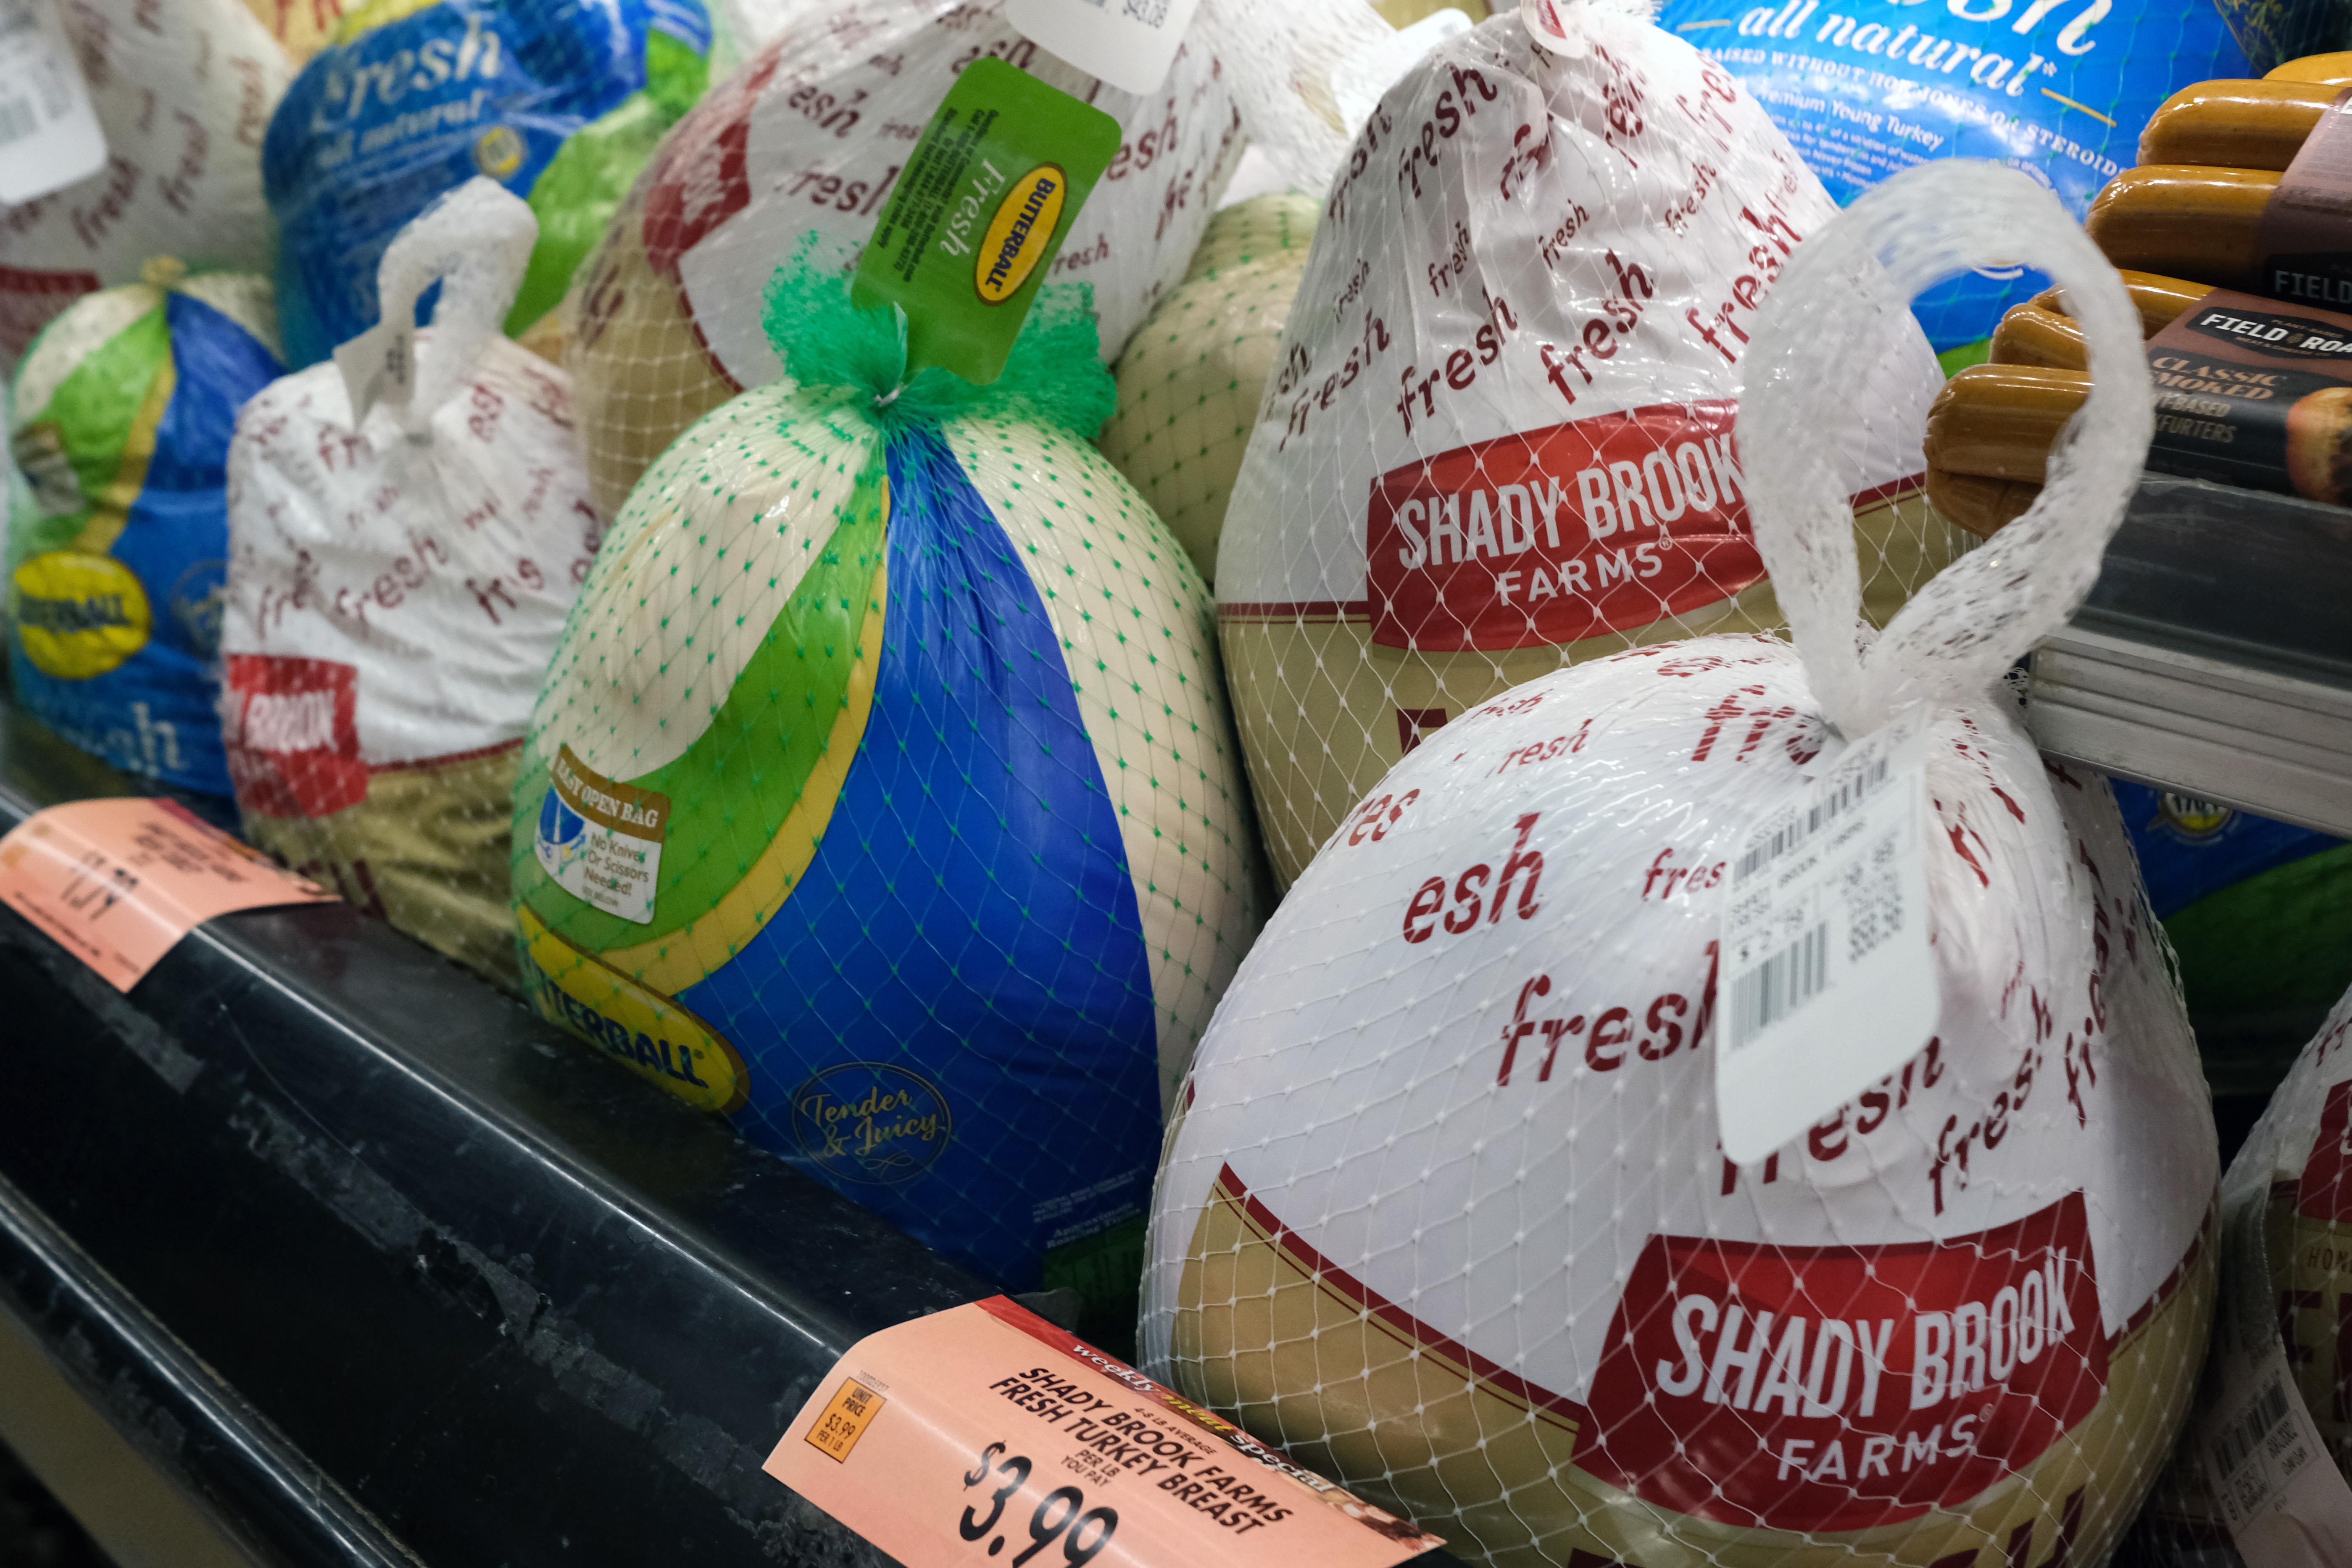 Frozen turkeys are displayed for sale inside a grocery store on November 14, 2022 in New York City. The price of turkeys, a staple for many Americans at Thanksgiving, is at record highs this year due to inflation and a rise in the price of feed among other cost issues.  (Photo by Spencer Platt/Getty Images)